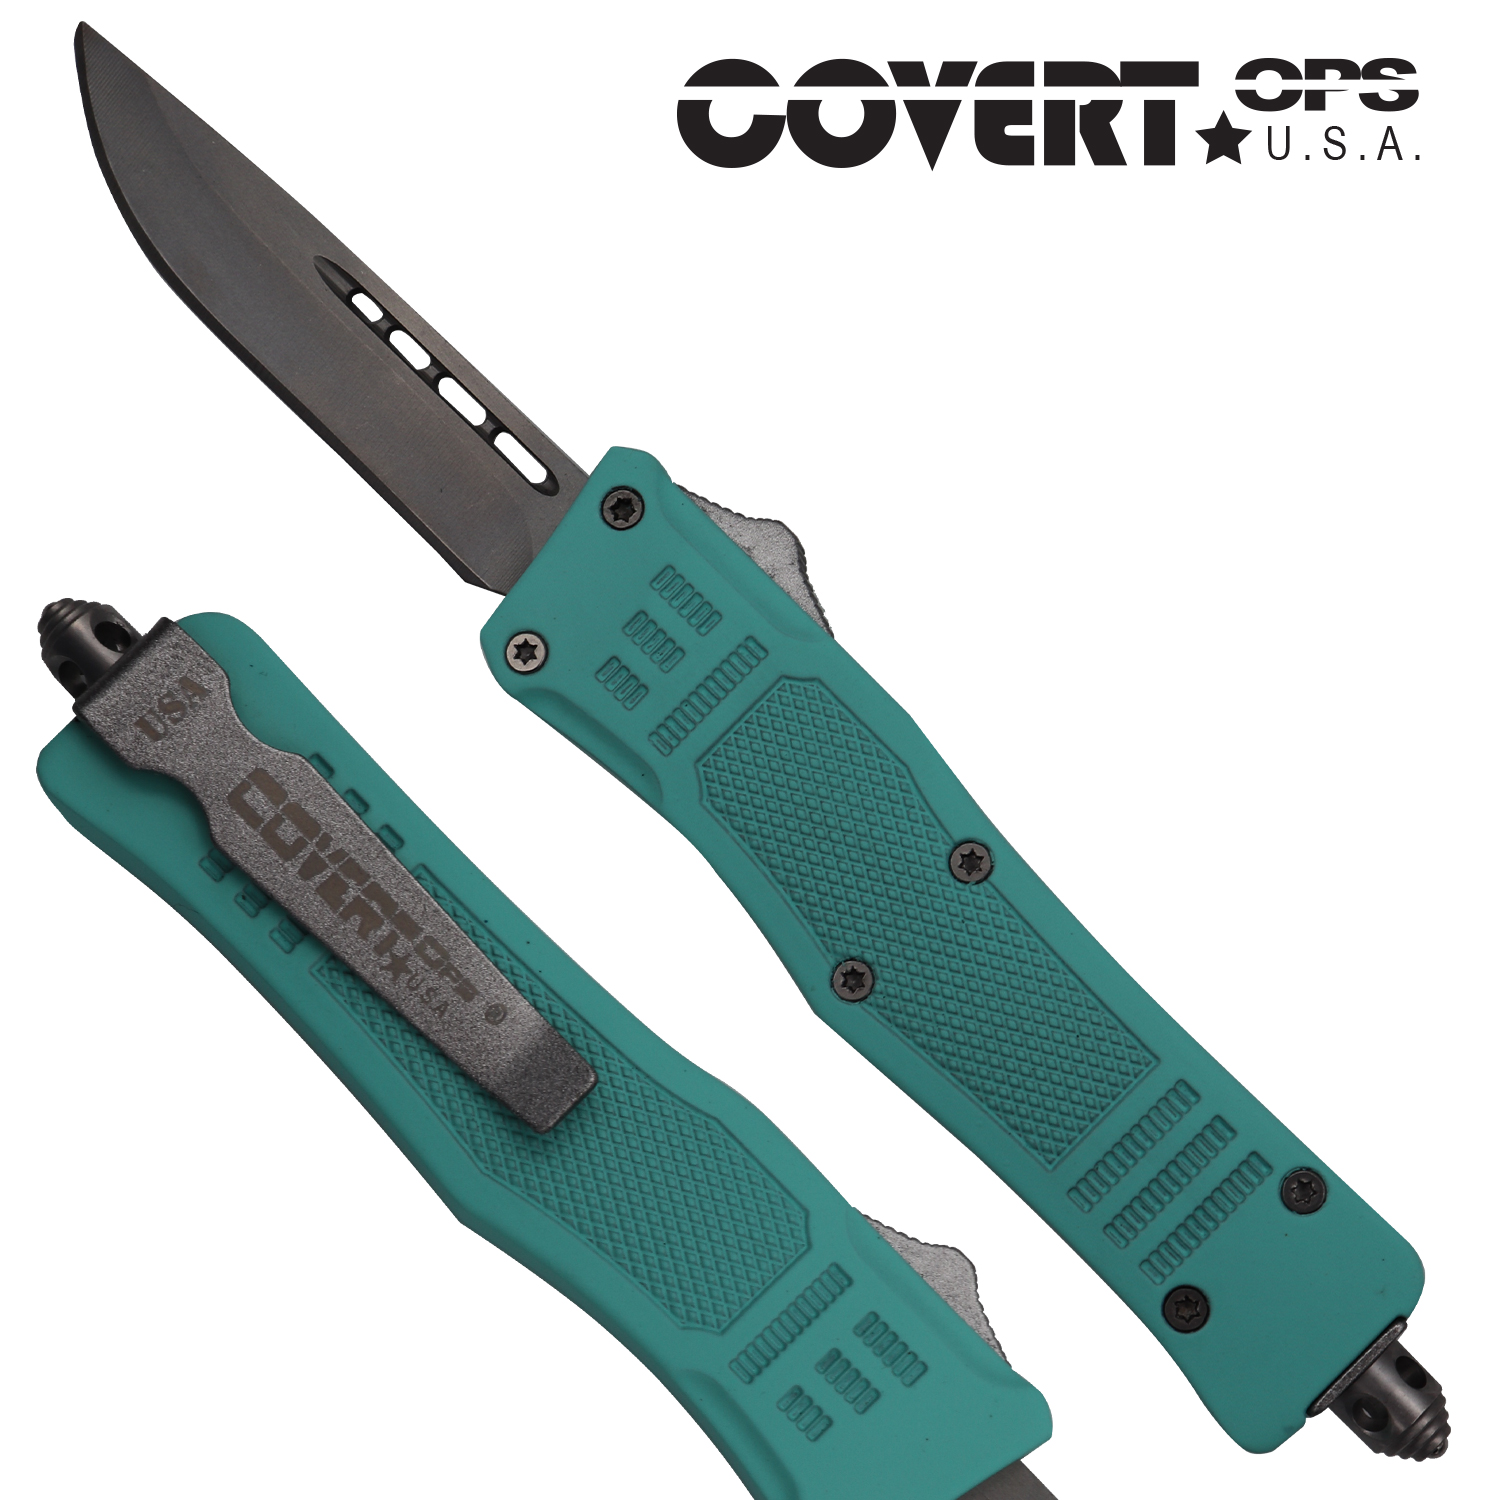 Covert OPS USA OTF Automatic Knife 7 inch overall Tiffany Blue Handle Silver Drop Point D2 Steel Blade